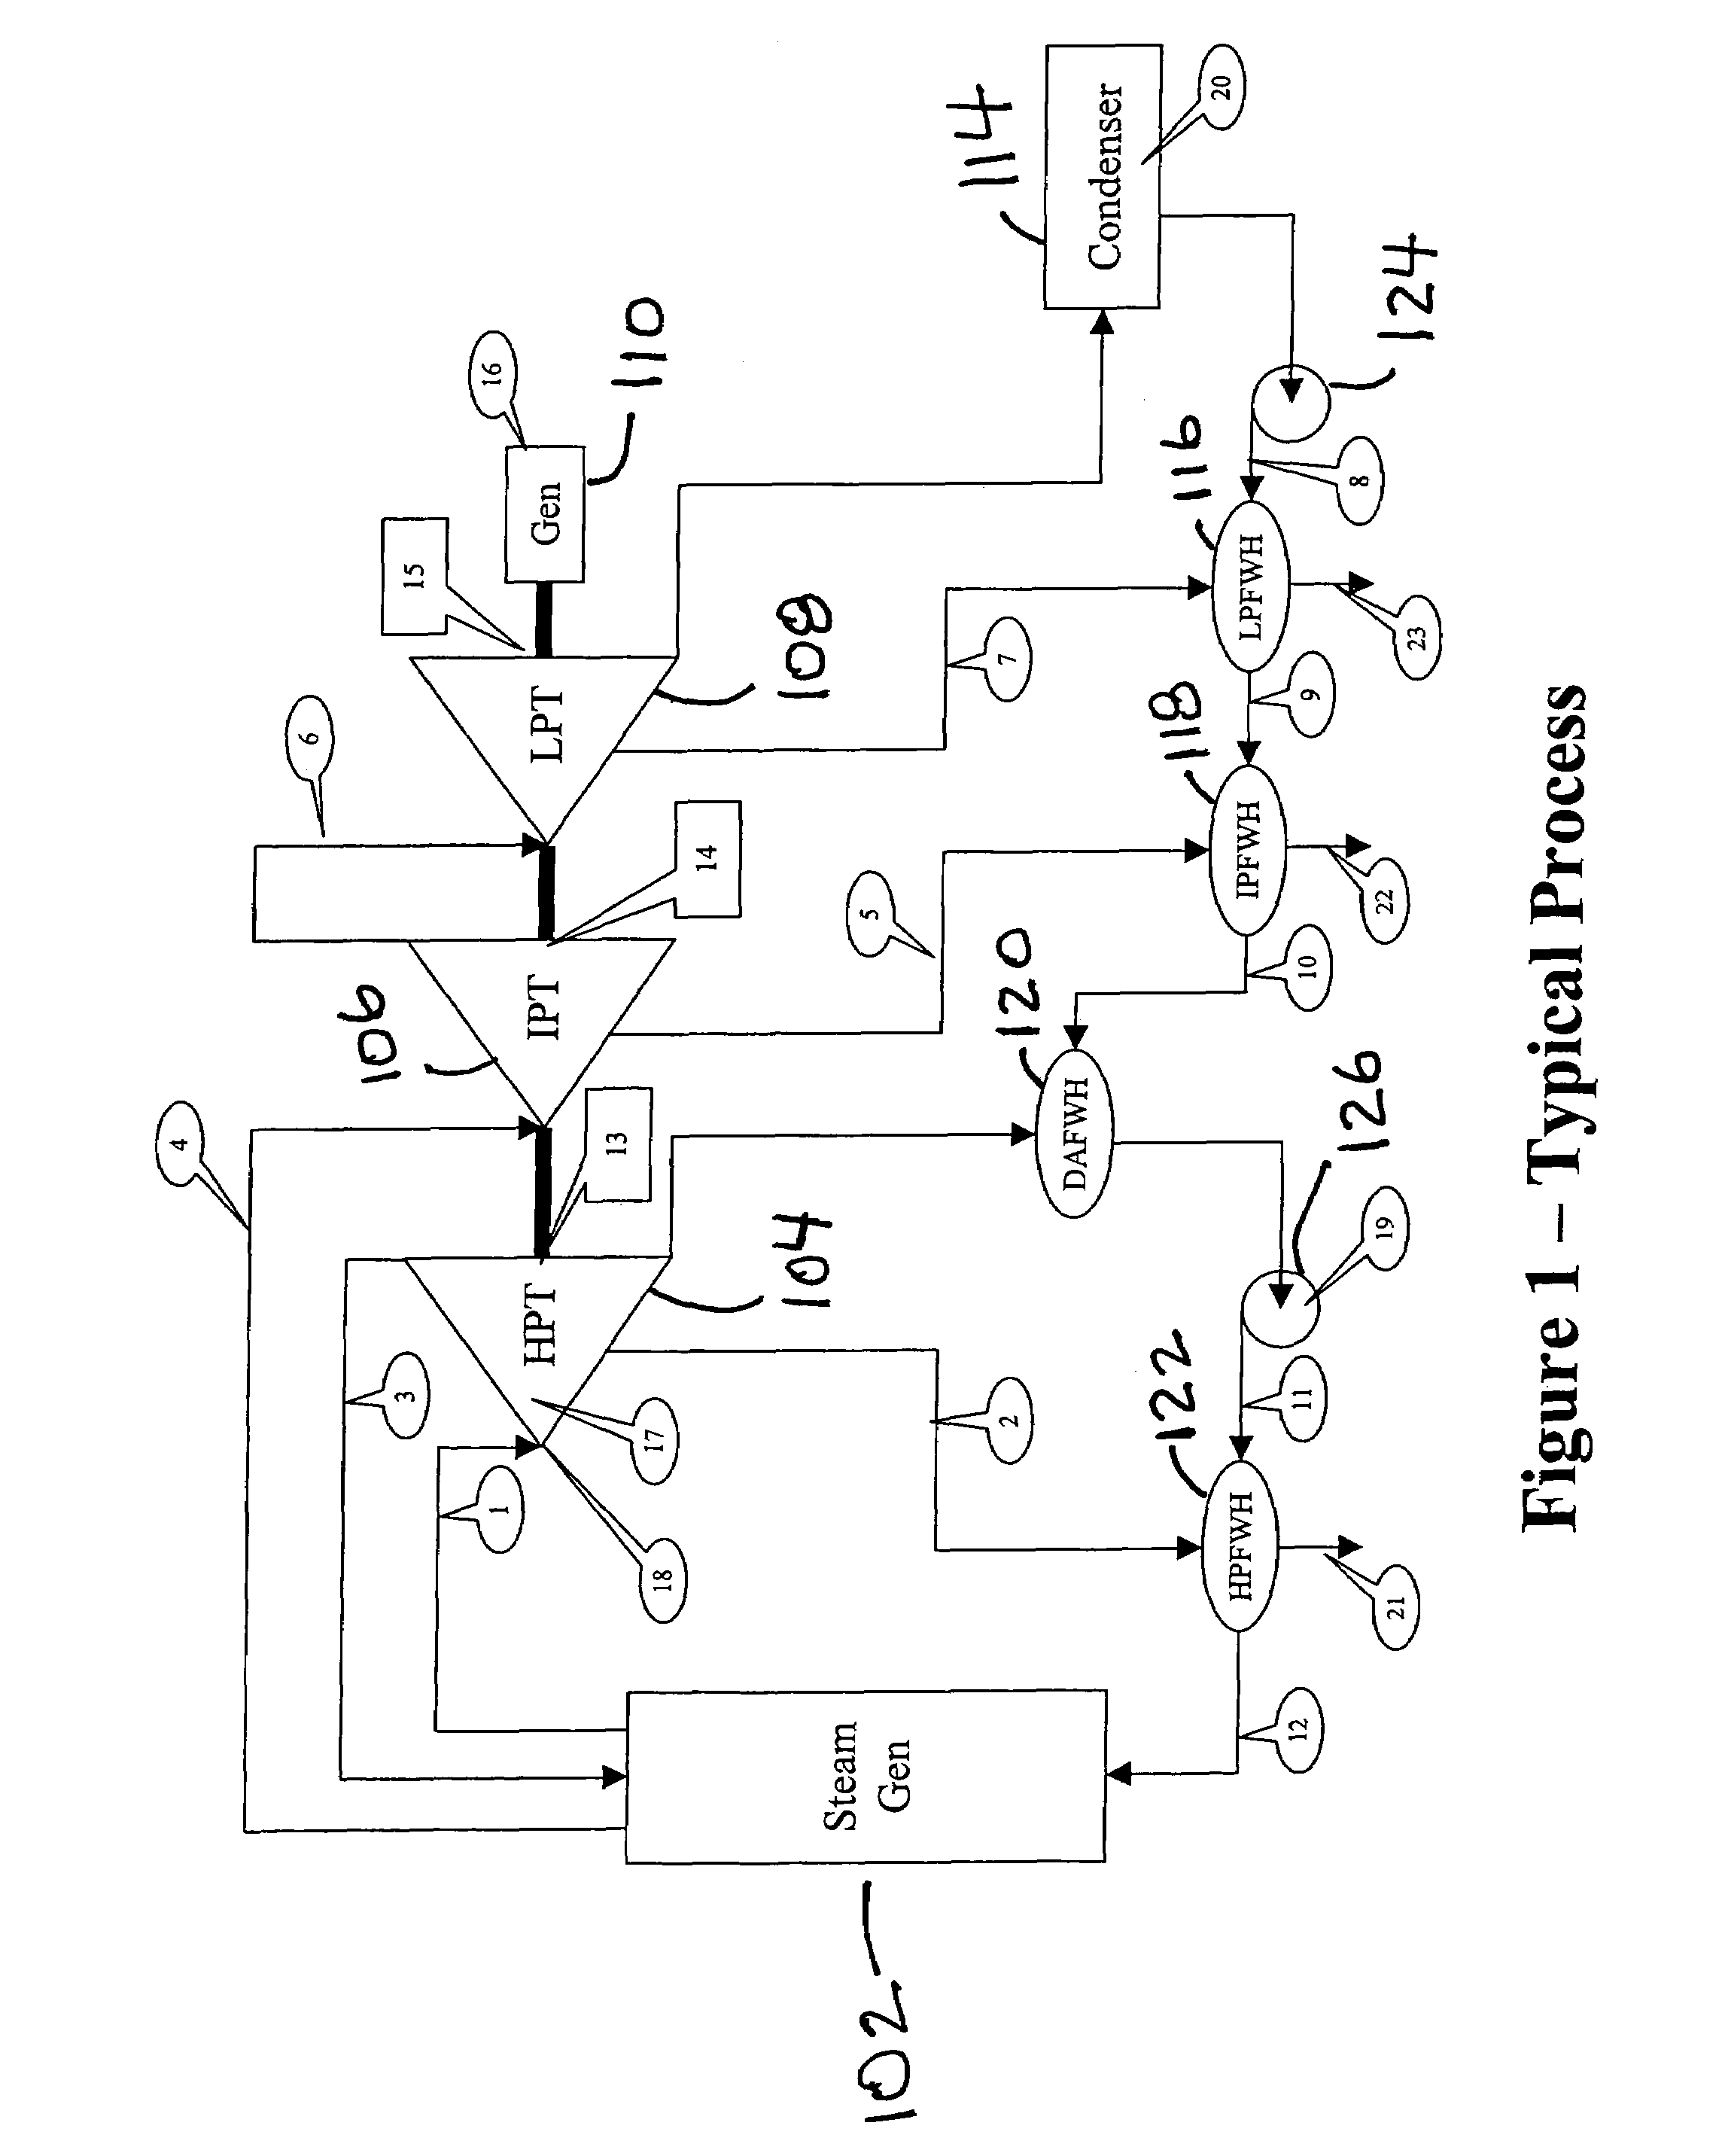 Method and apparatus to diagnose mechanical problems in machinery